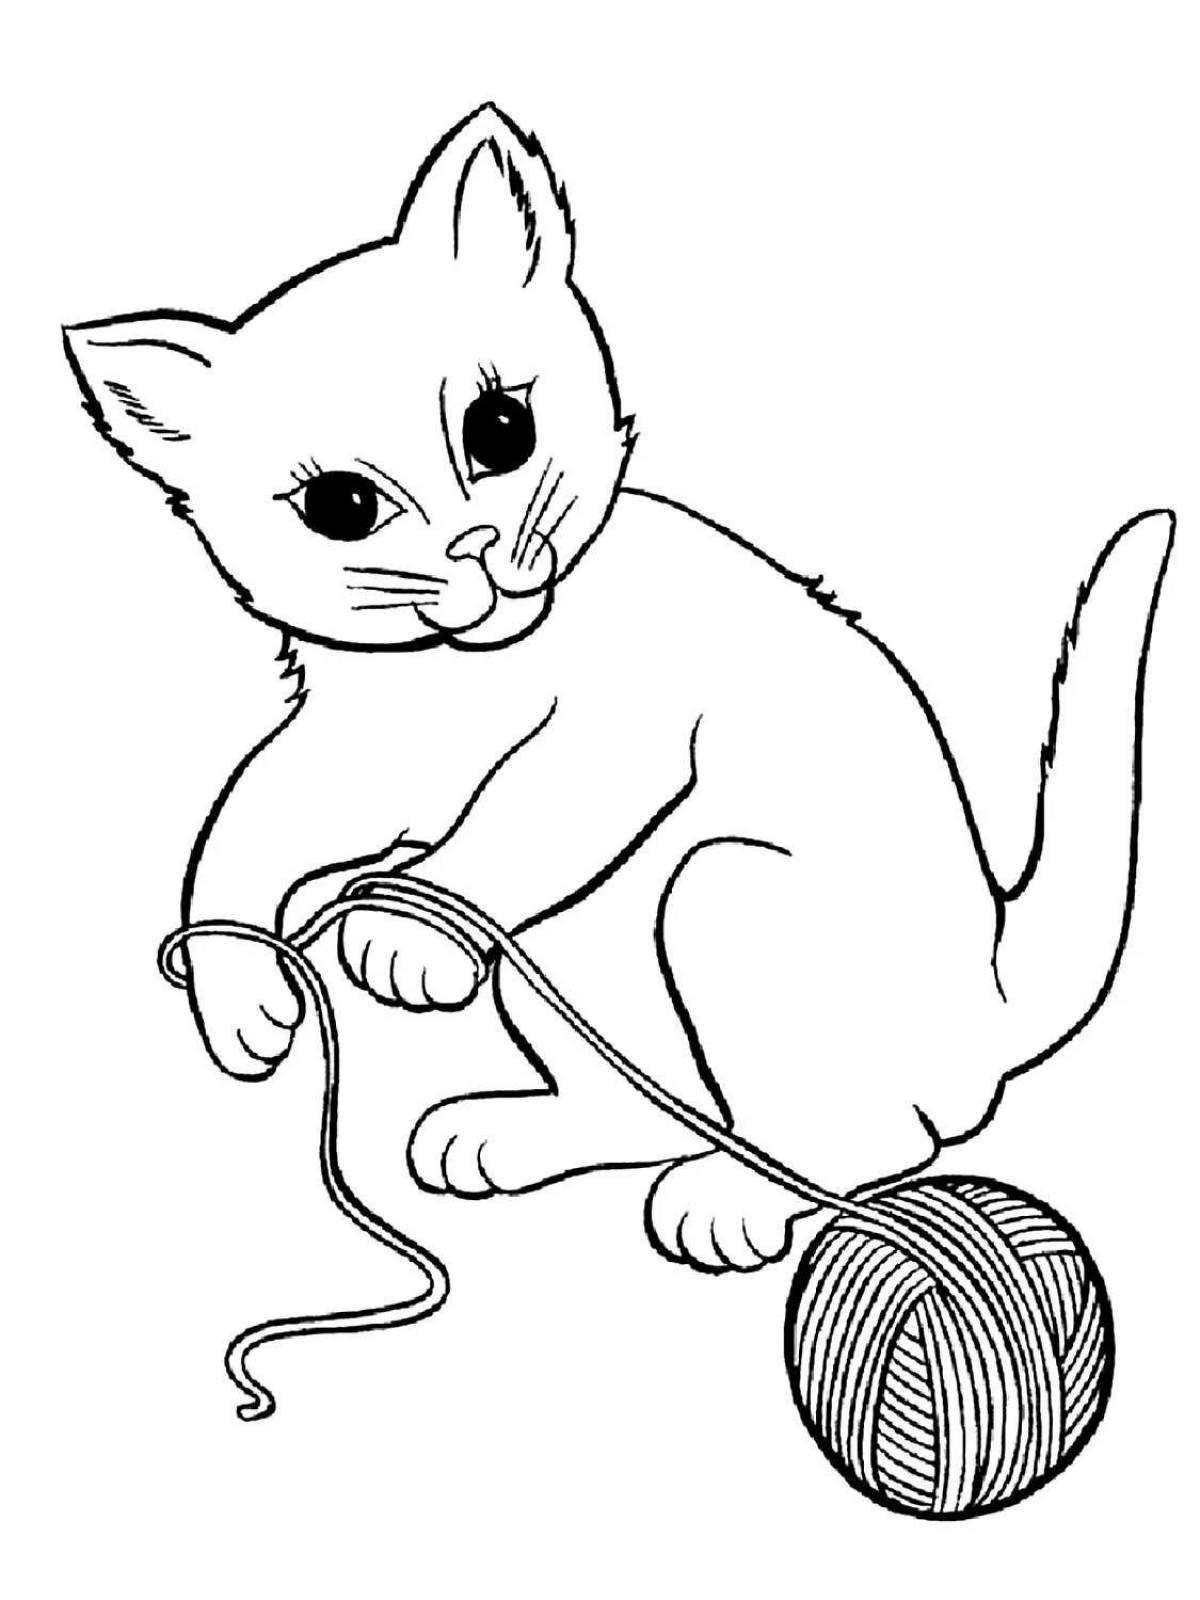 Coloring page dazzling cat